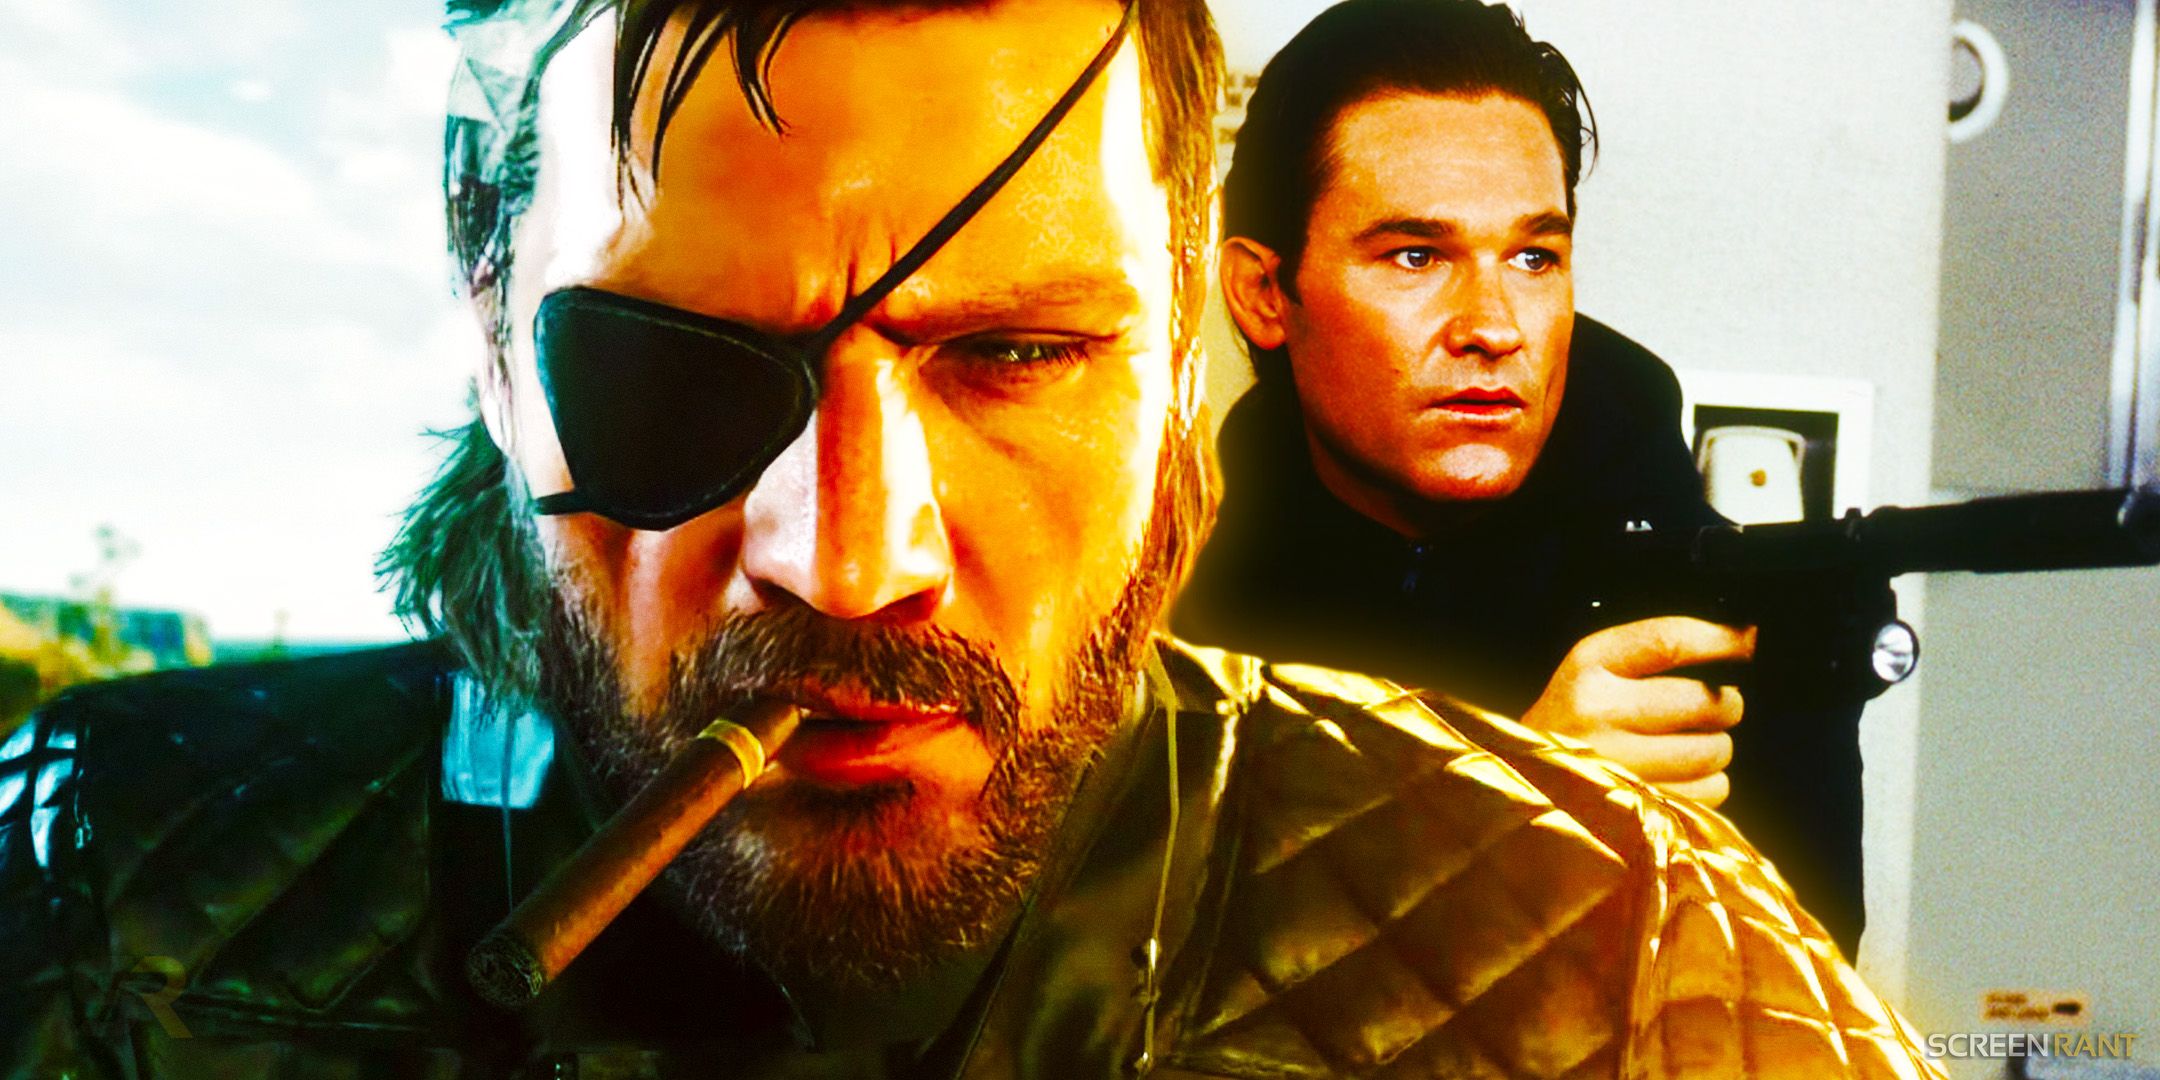 Snake from Metal Gear Solid V: The Phantom Pain smoking with Kurt Russell holding a silenced pistol in 1996's Executive Decision